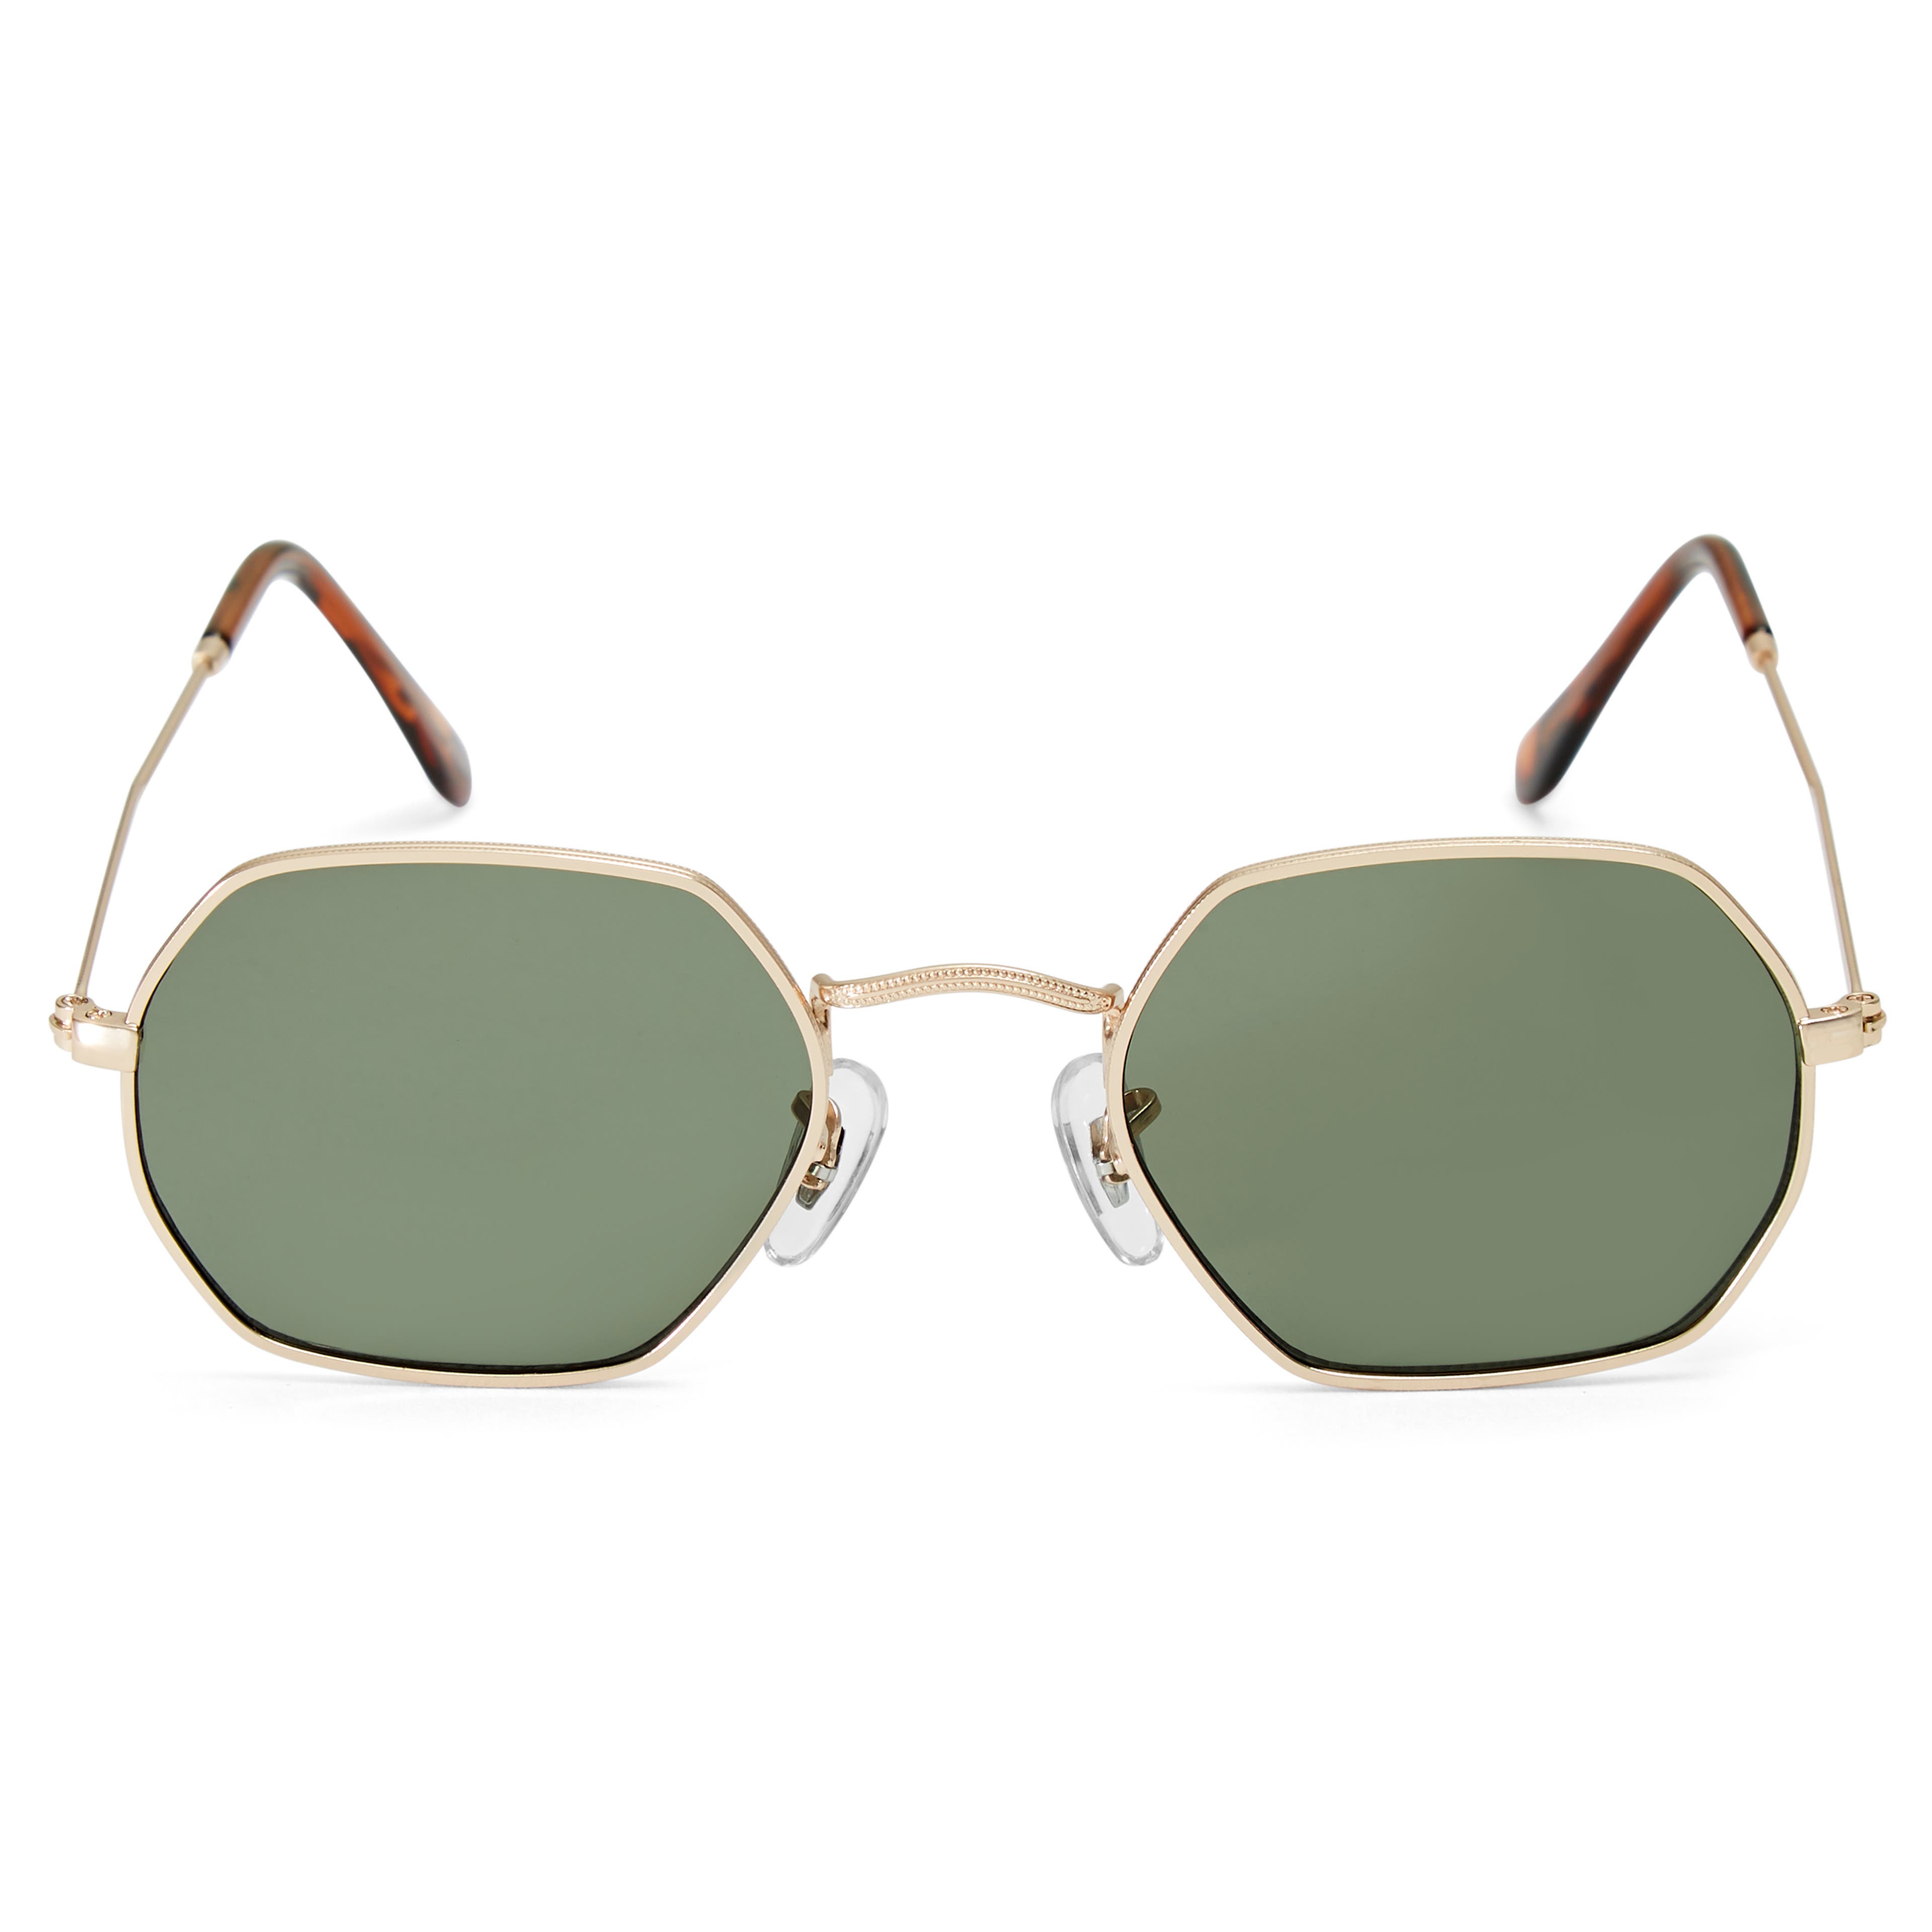 Gold-Tone & Army Green Groovy Sunglasses